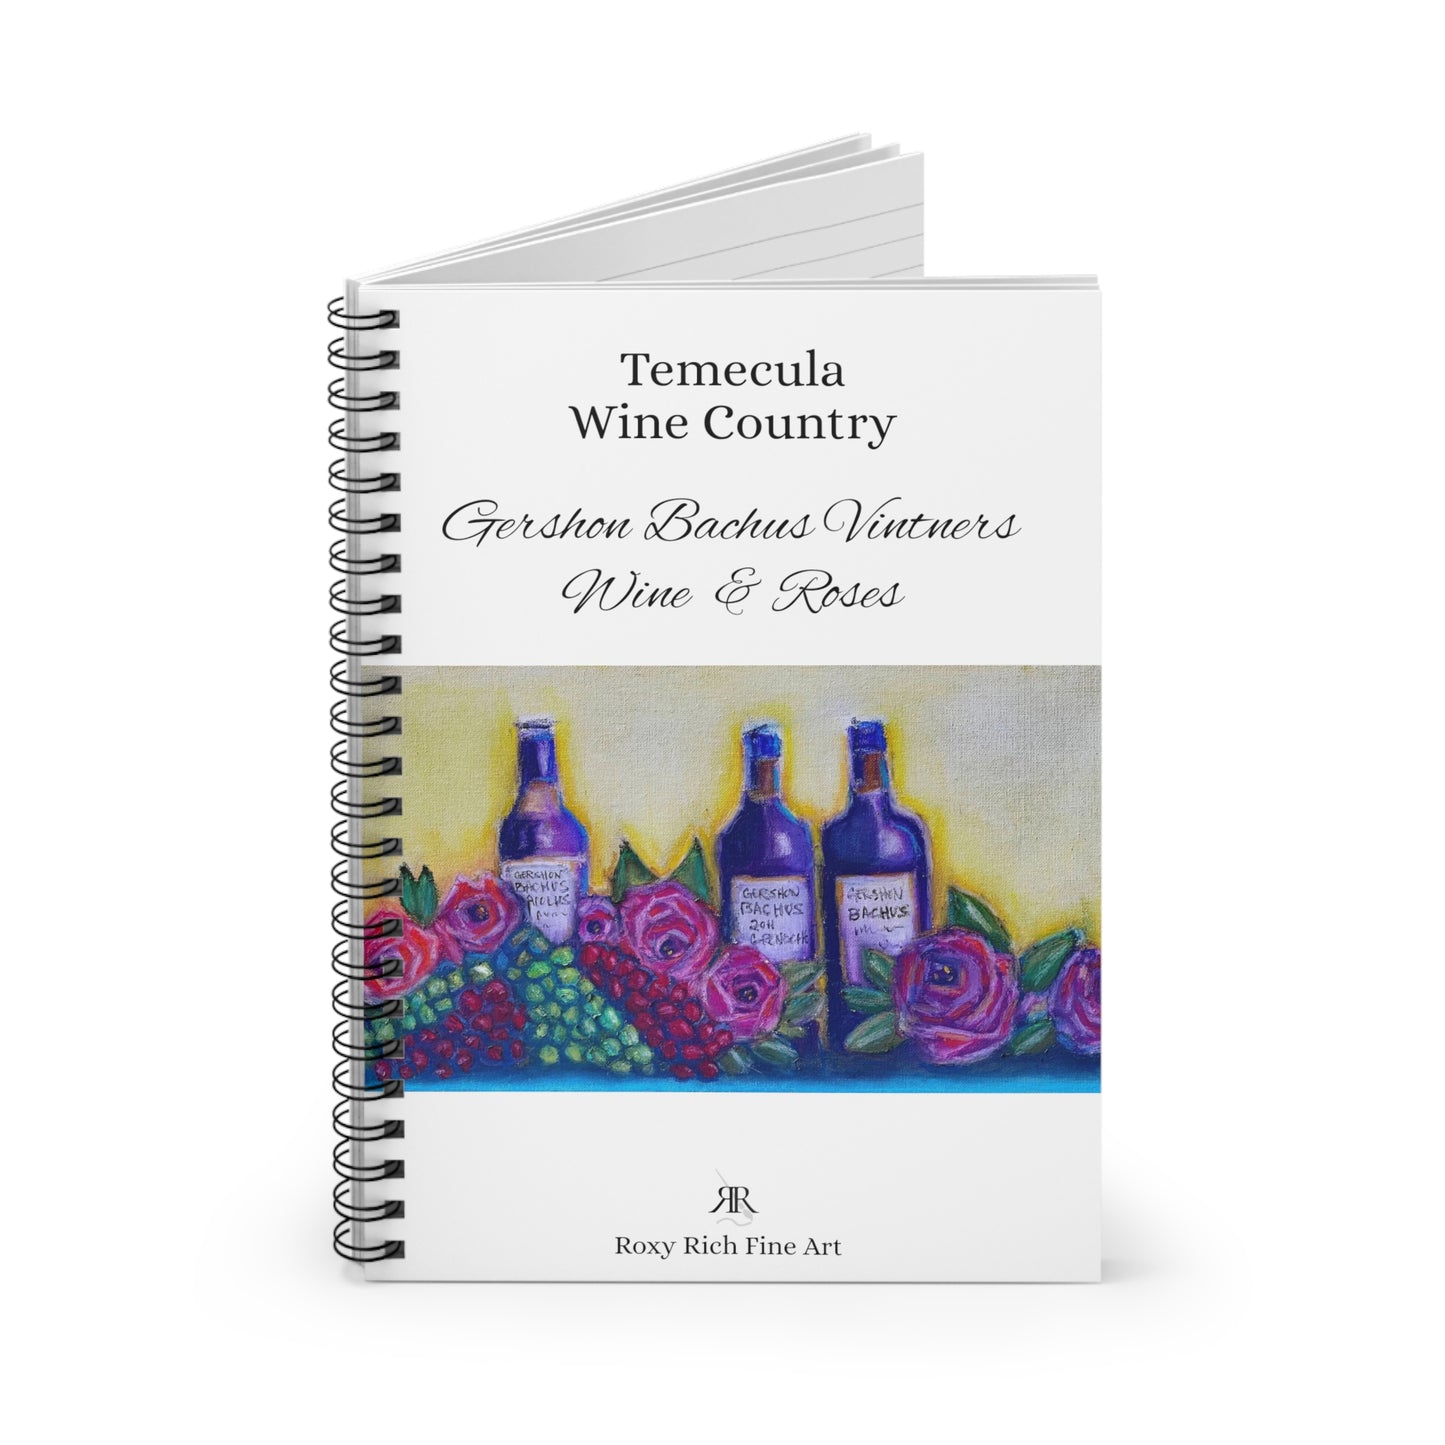 Temecula Wine Country "GBV Wine and Roses" Spiral Notebook